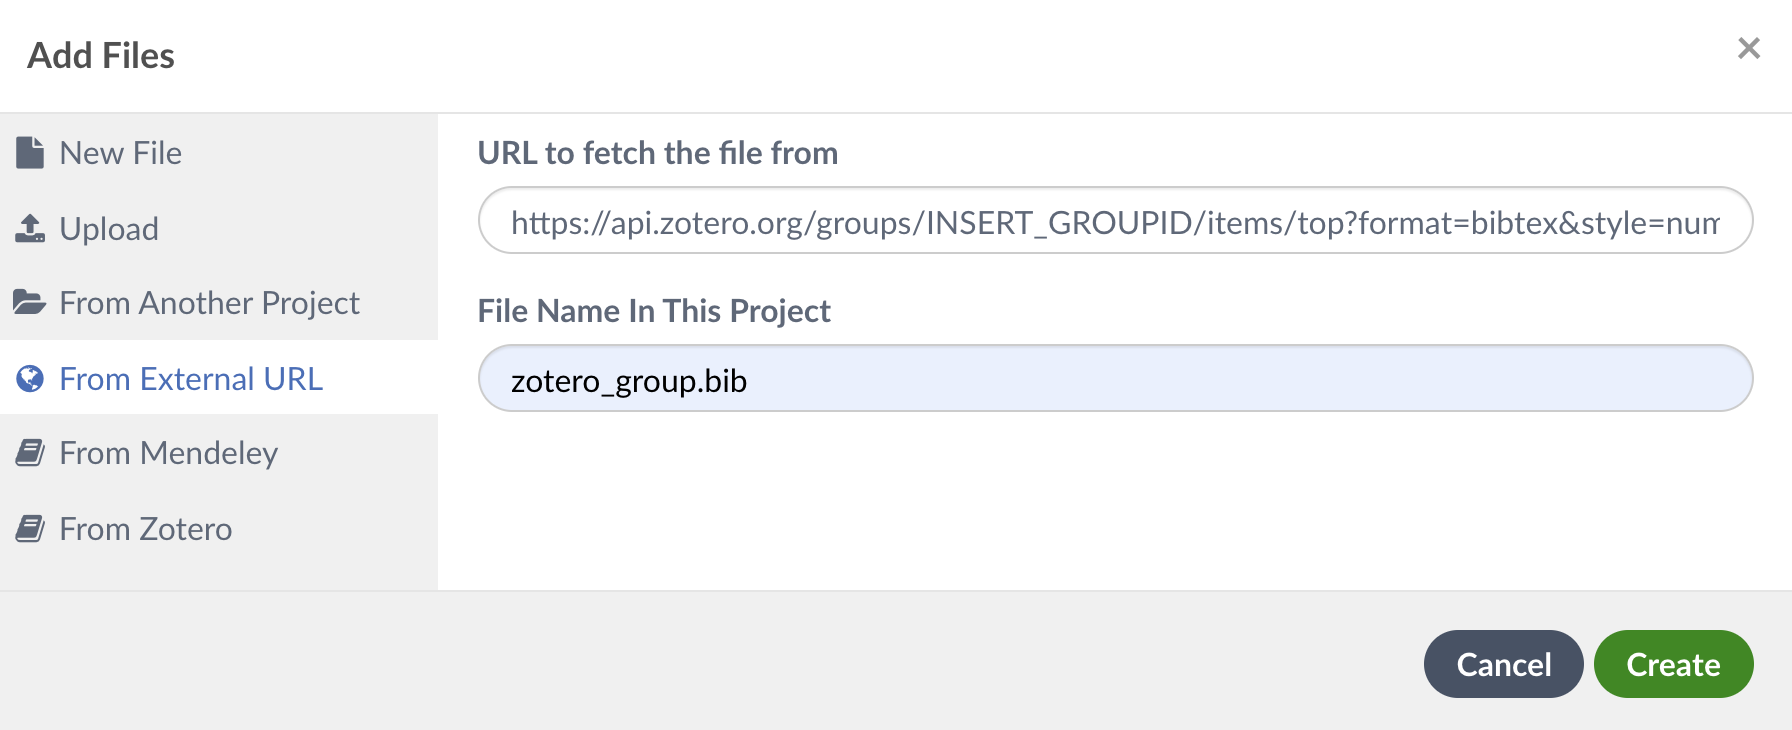 Two Ways to Sync Your Zotero Group Library in Overleaf